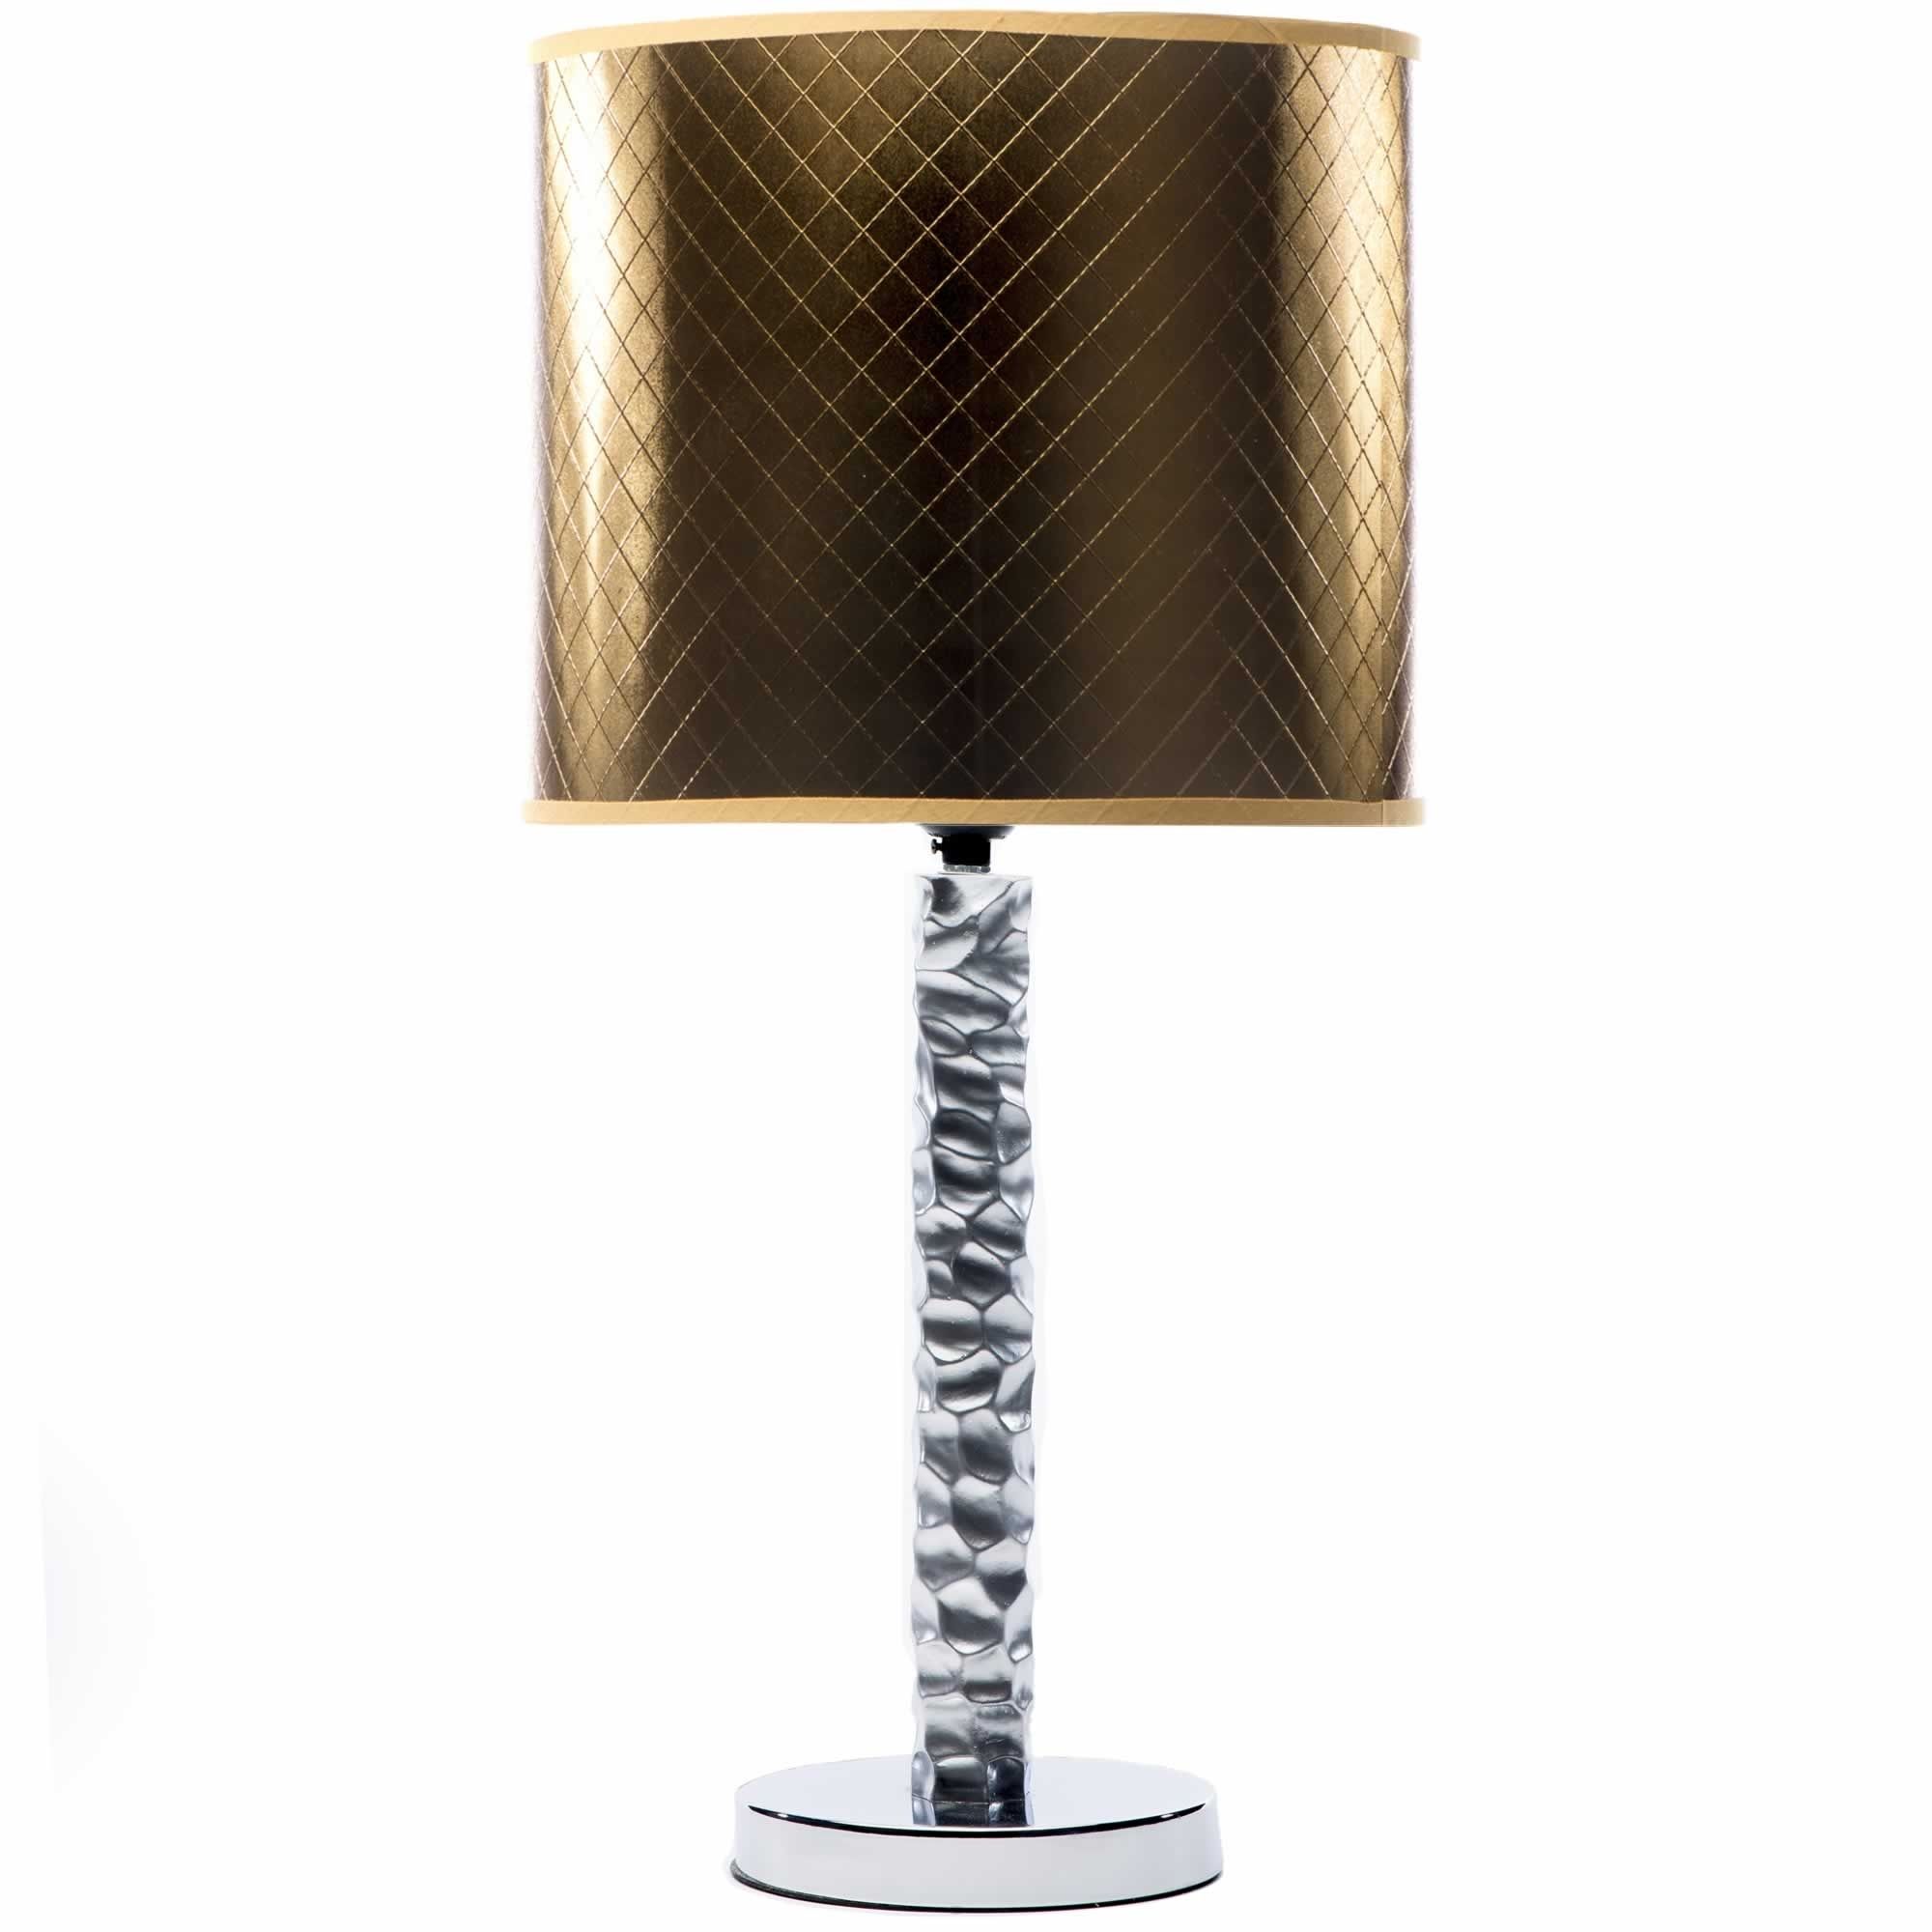 Top 65 Divine Small Table Lamps For Bedroom Designer Red Living Room With Red Living Room Table Lamps (View 15 of 15)